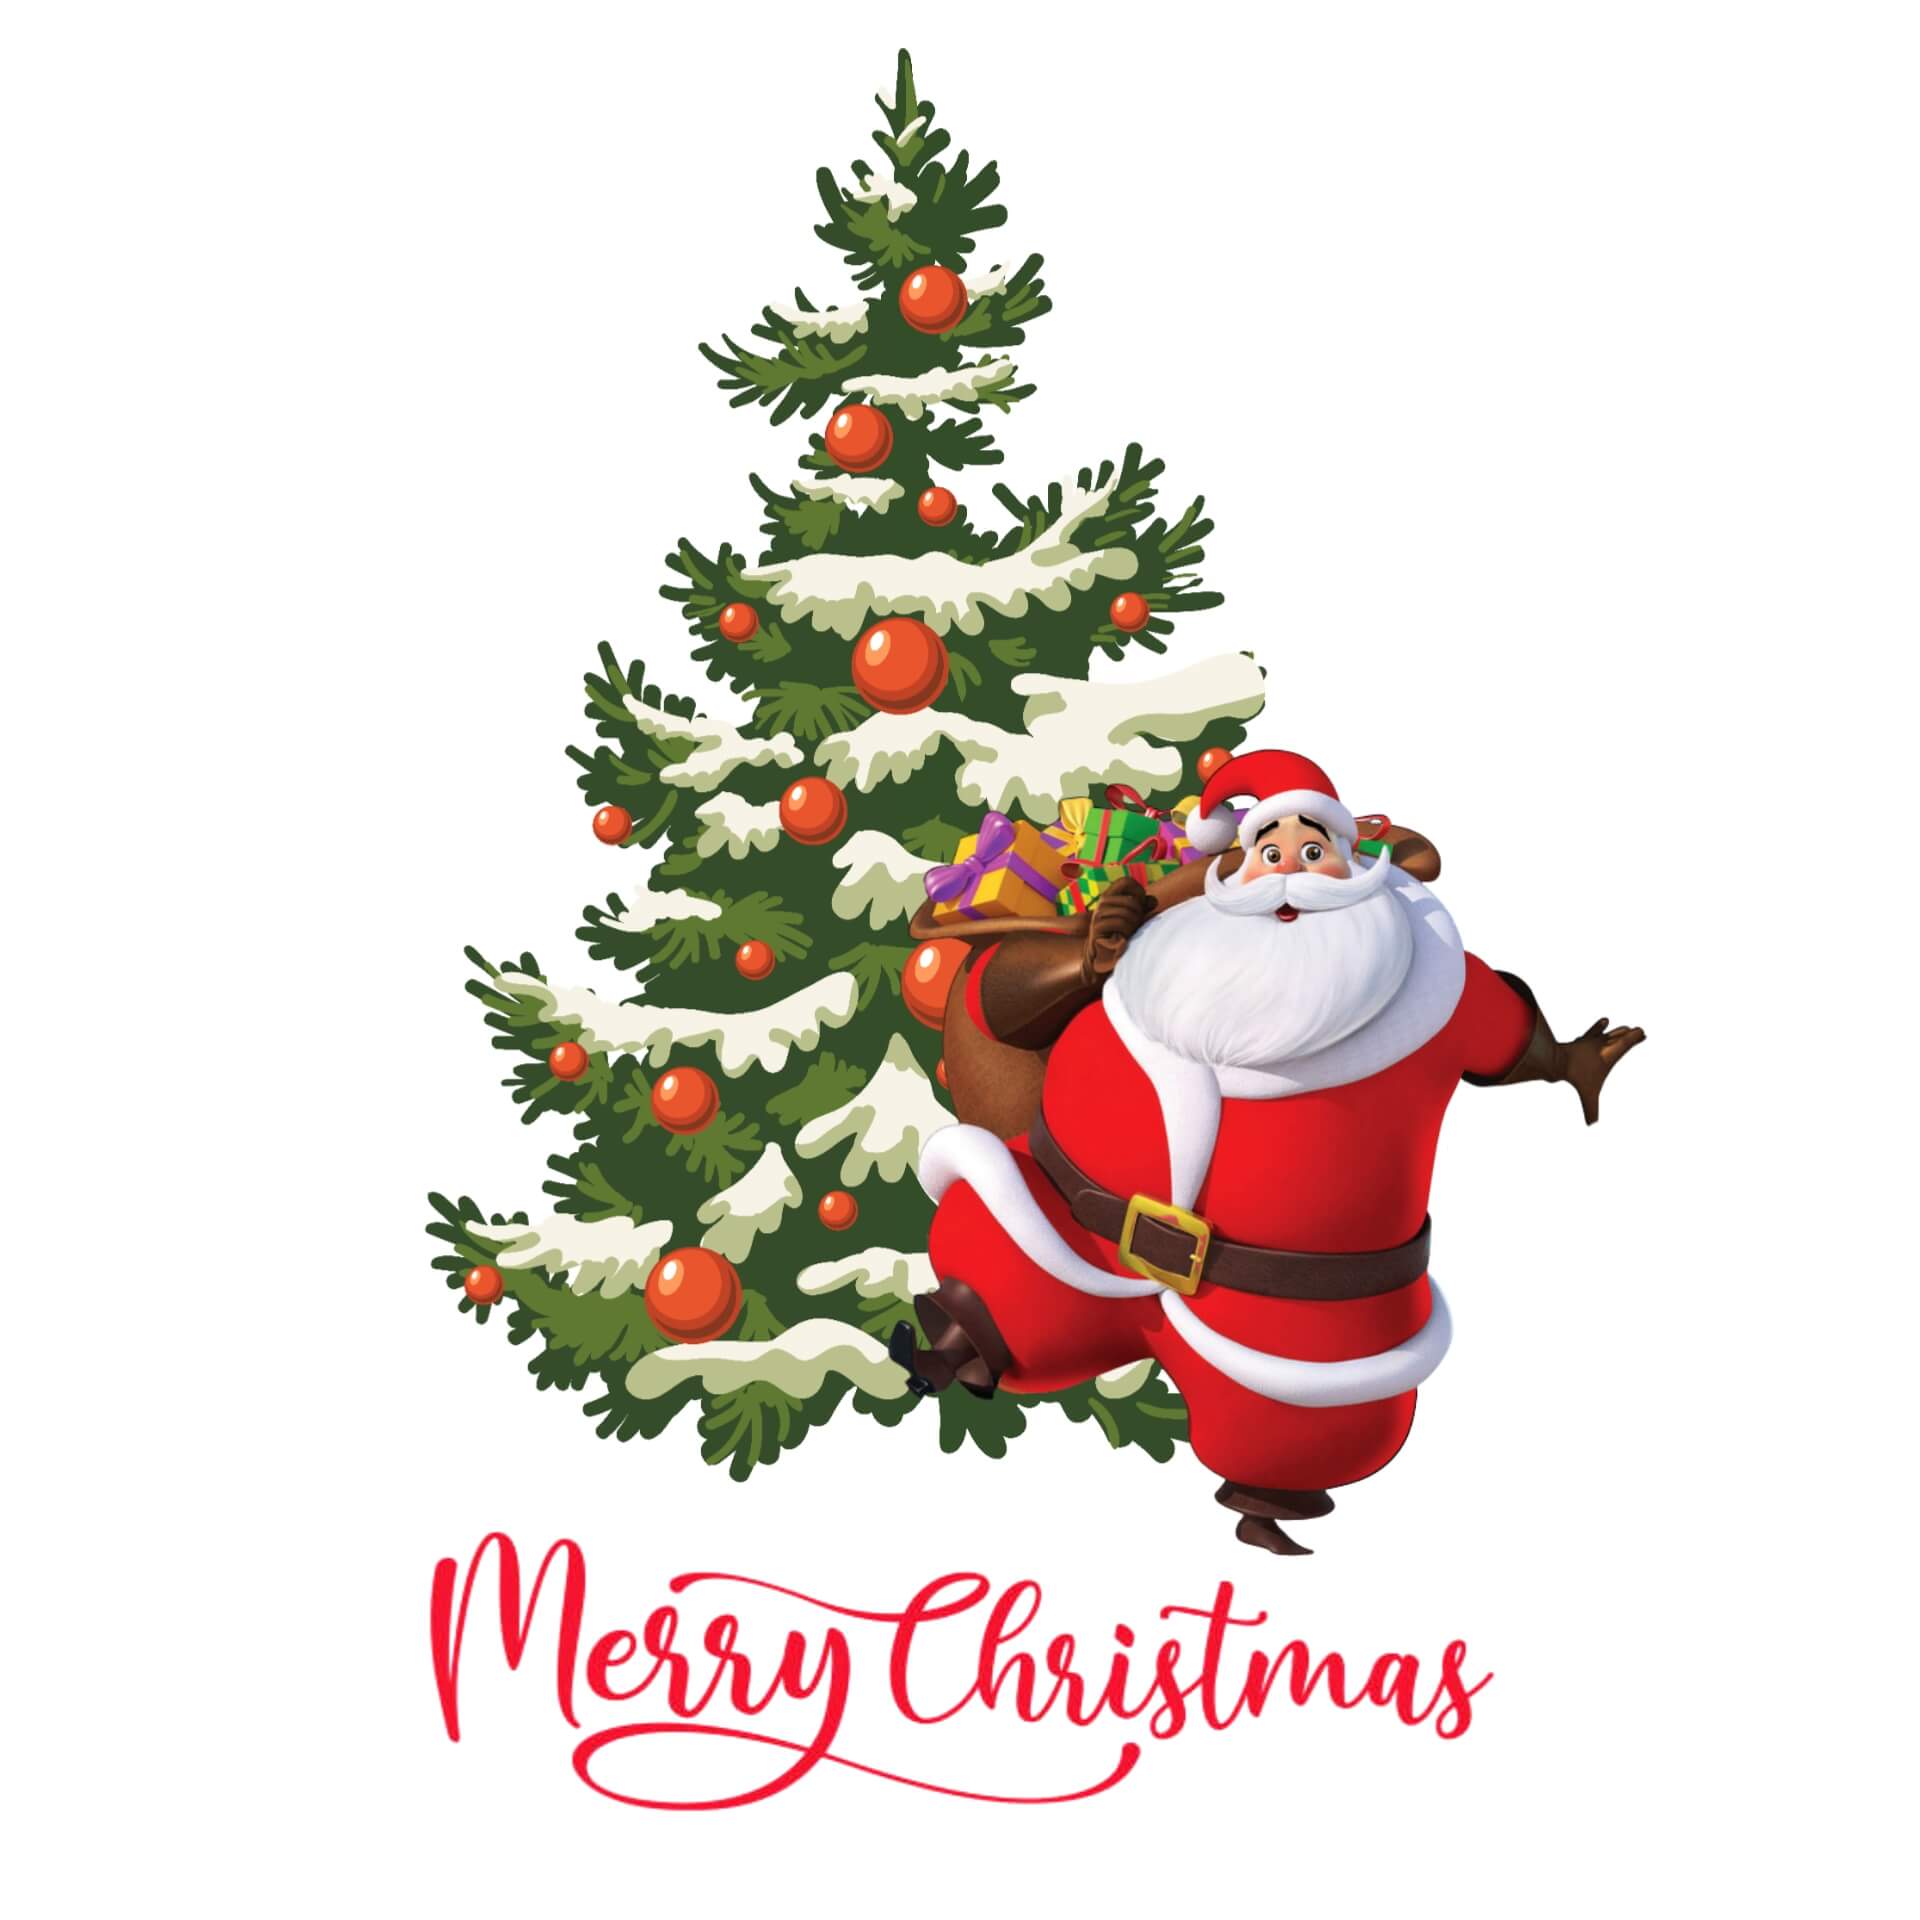 Merry Christmas Vector Images